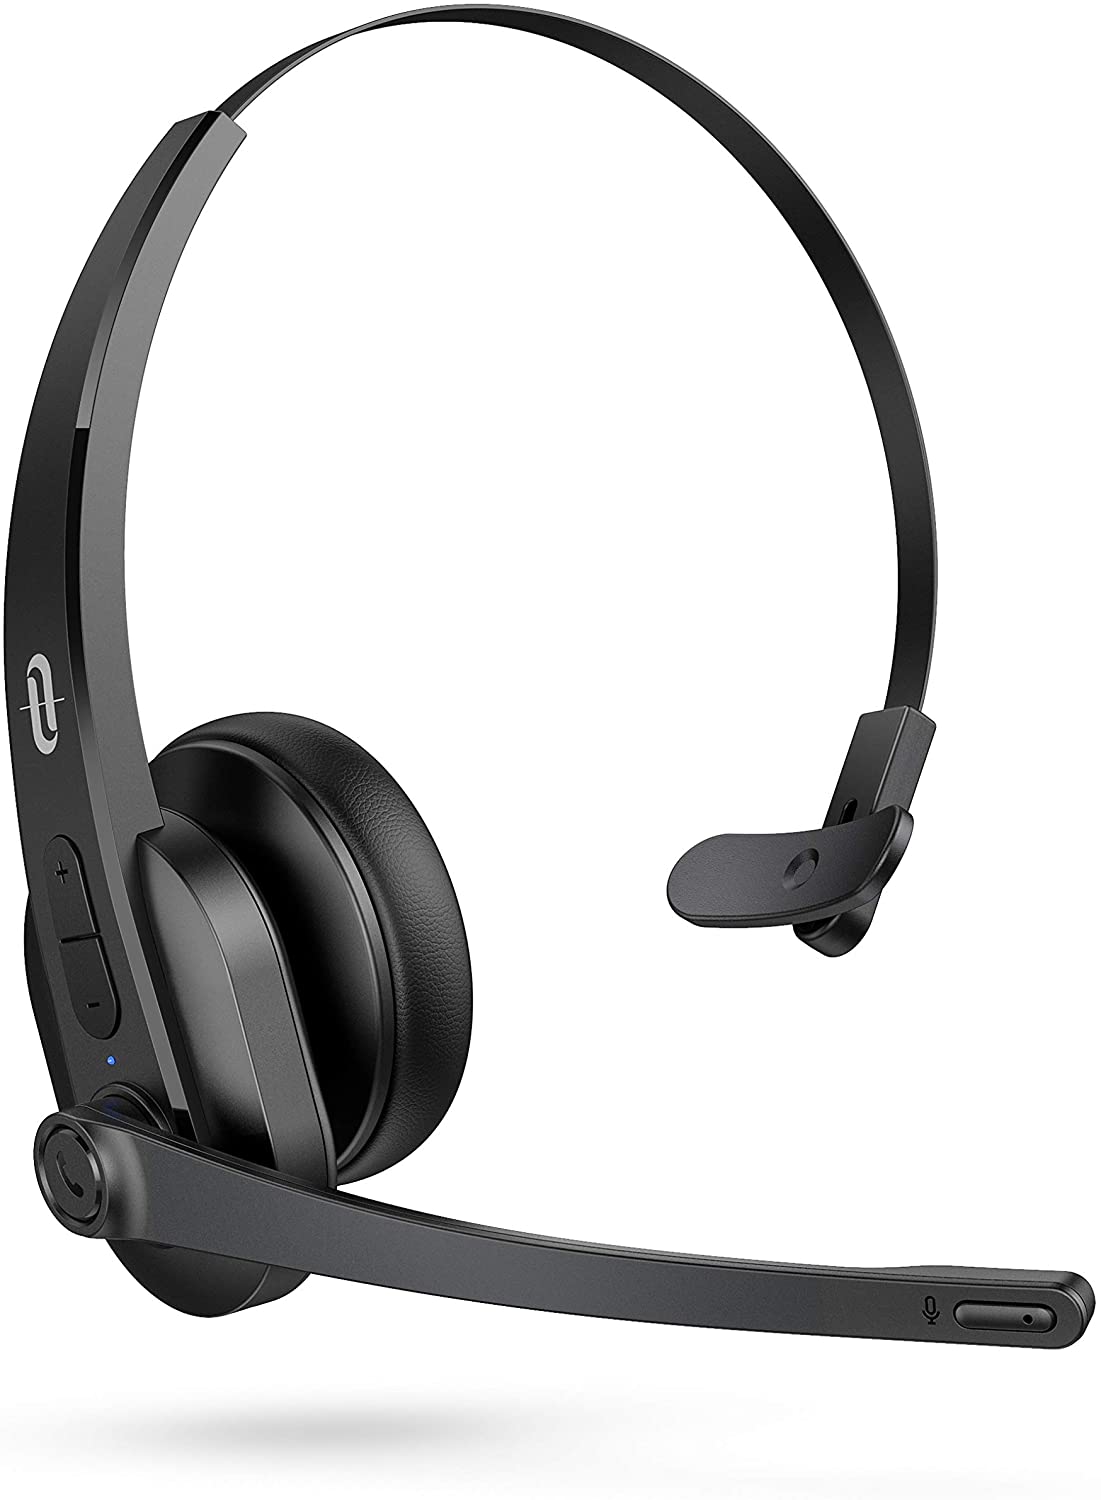 Taotronics - best headset for dictation